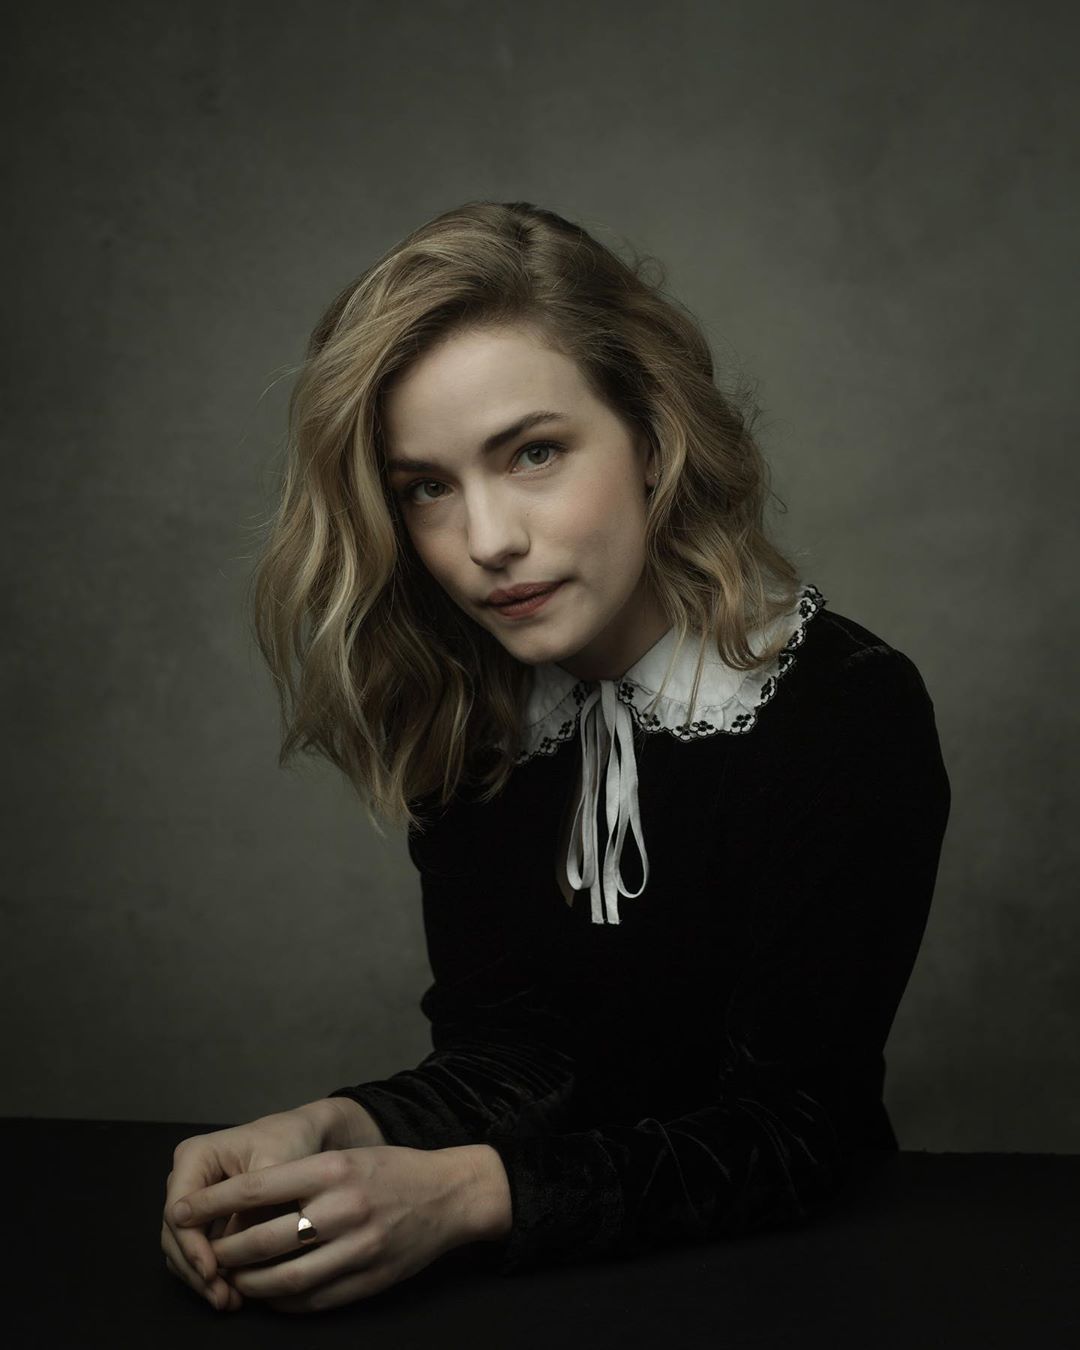 Willa Fitzgerald Photoshoot 2018 Wallpapers